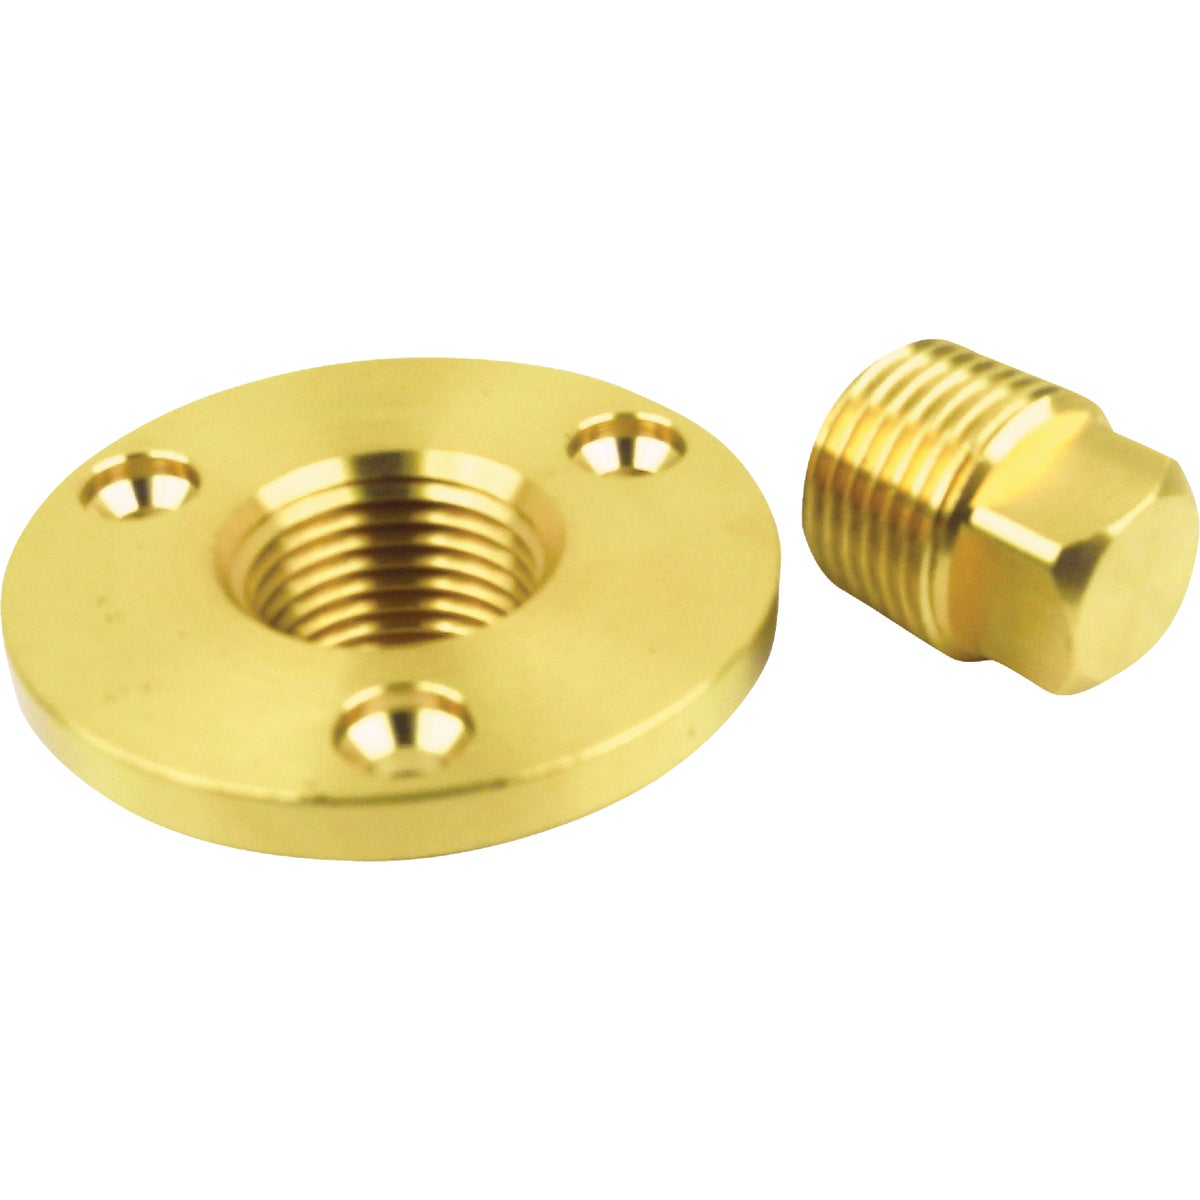 Item 578672, Cast bronze flange. 2-inch outside diameter. Fits 1/2-inch (1.27 cm) pipe.